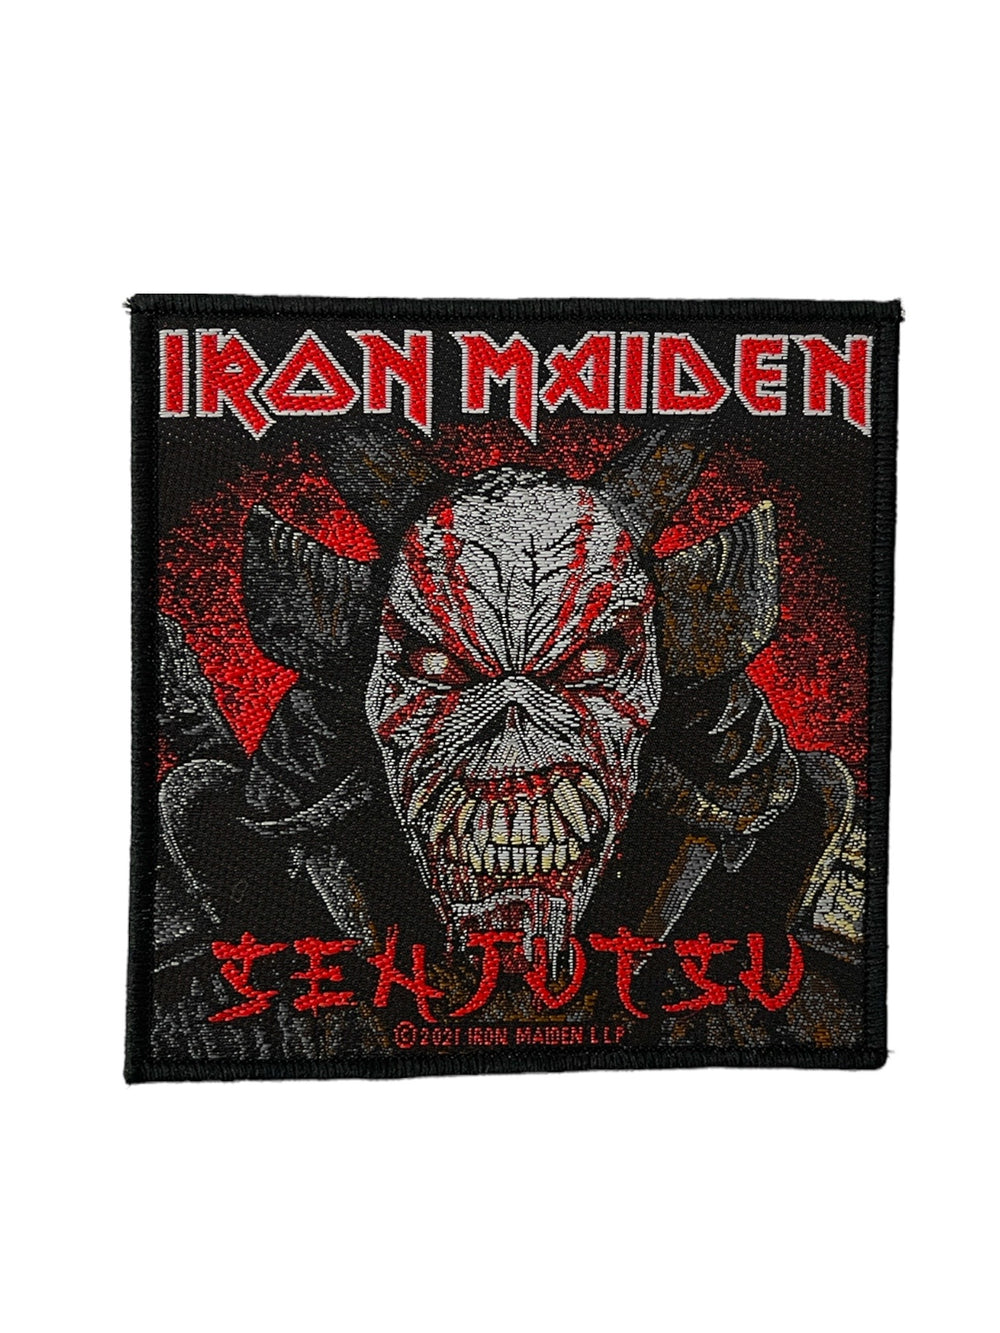 Iron Maiden Senjutsu Official Woven Patch Brand New